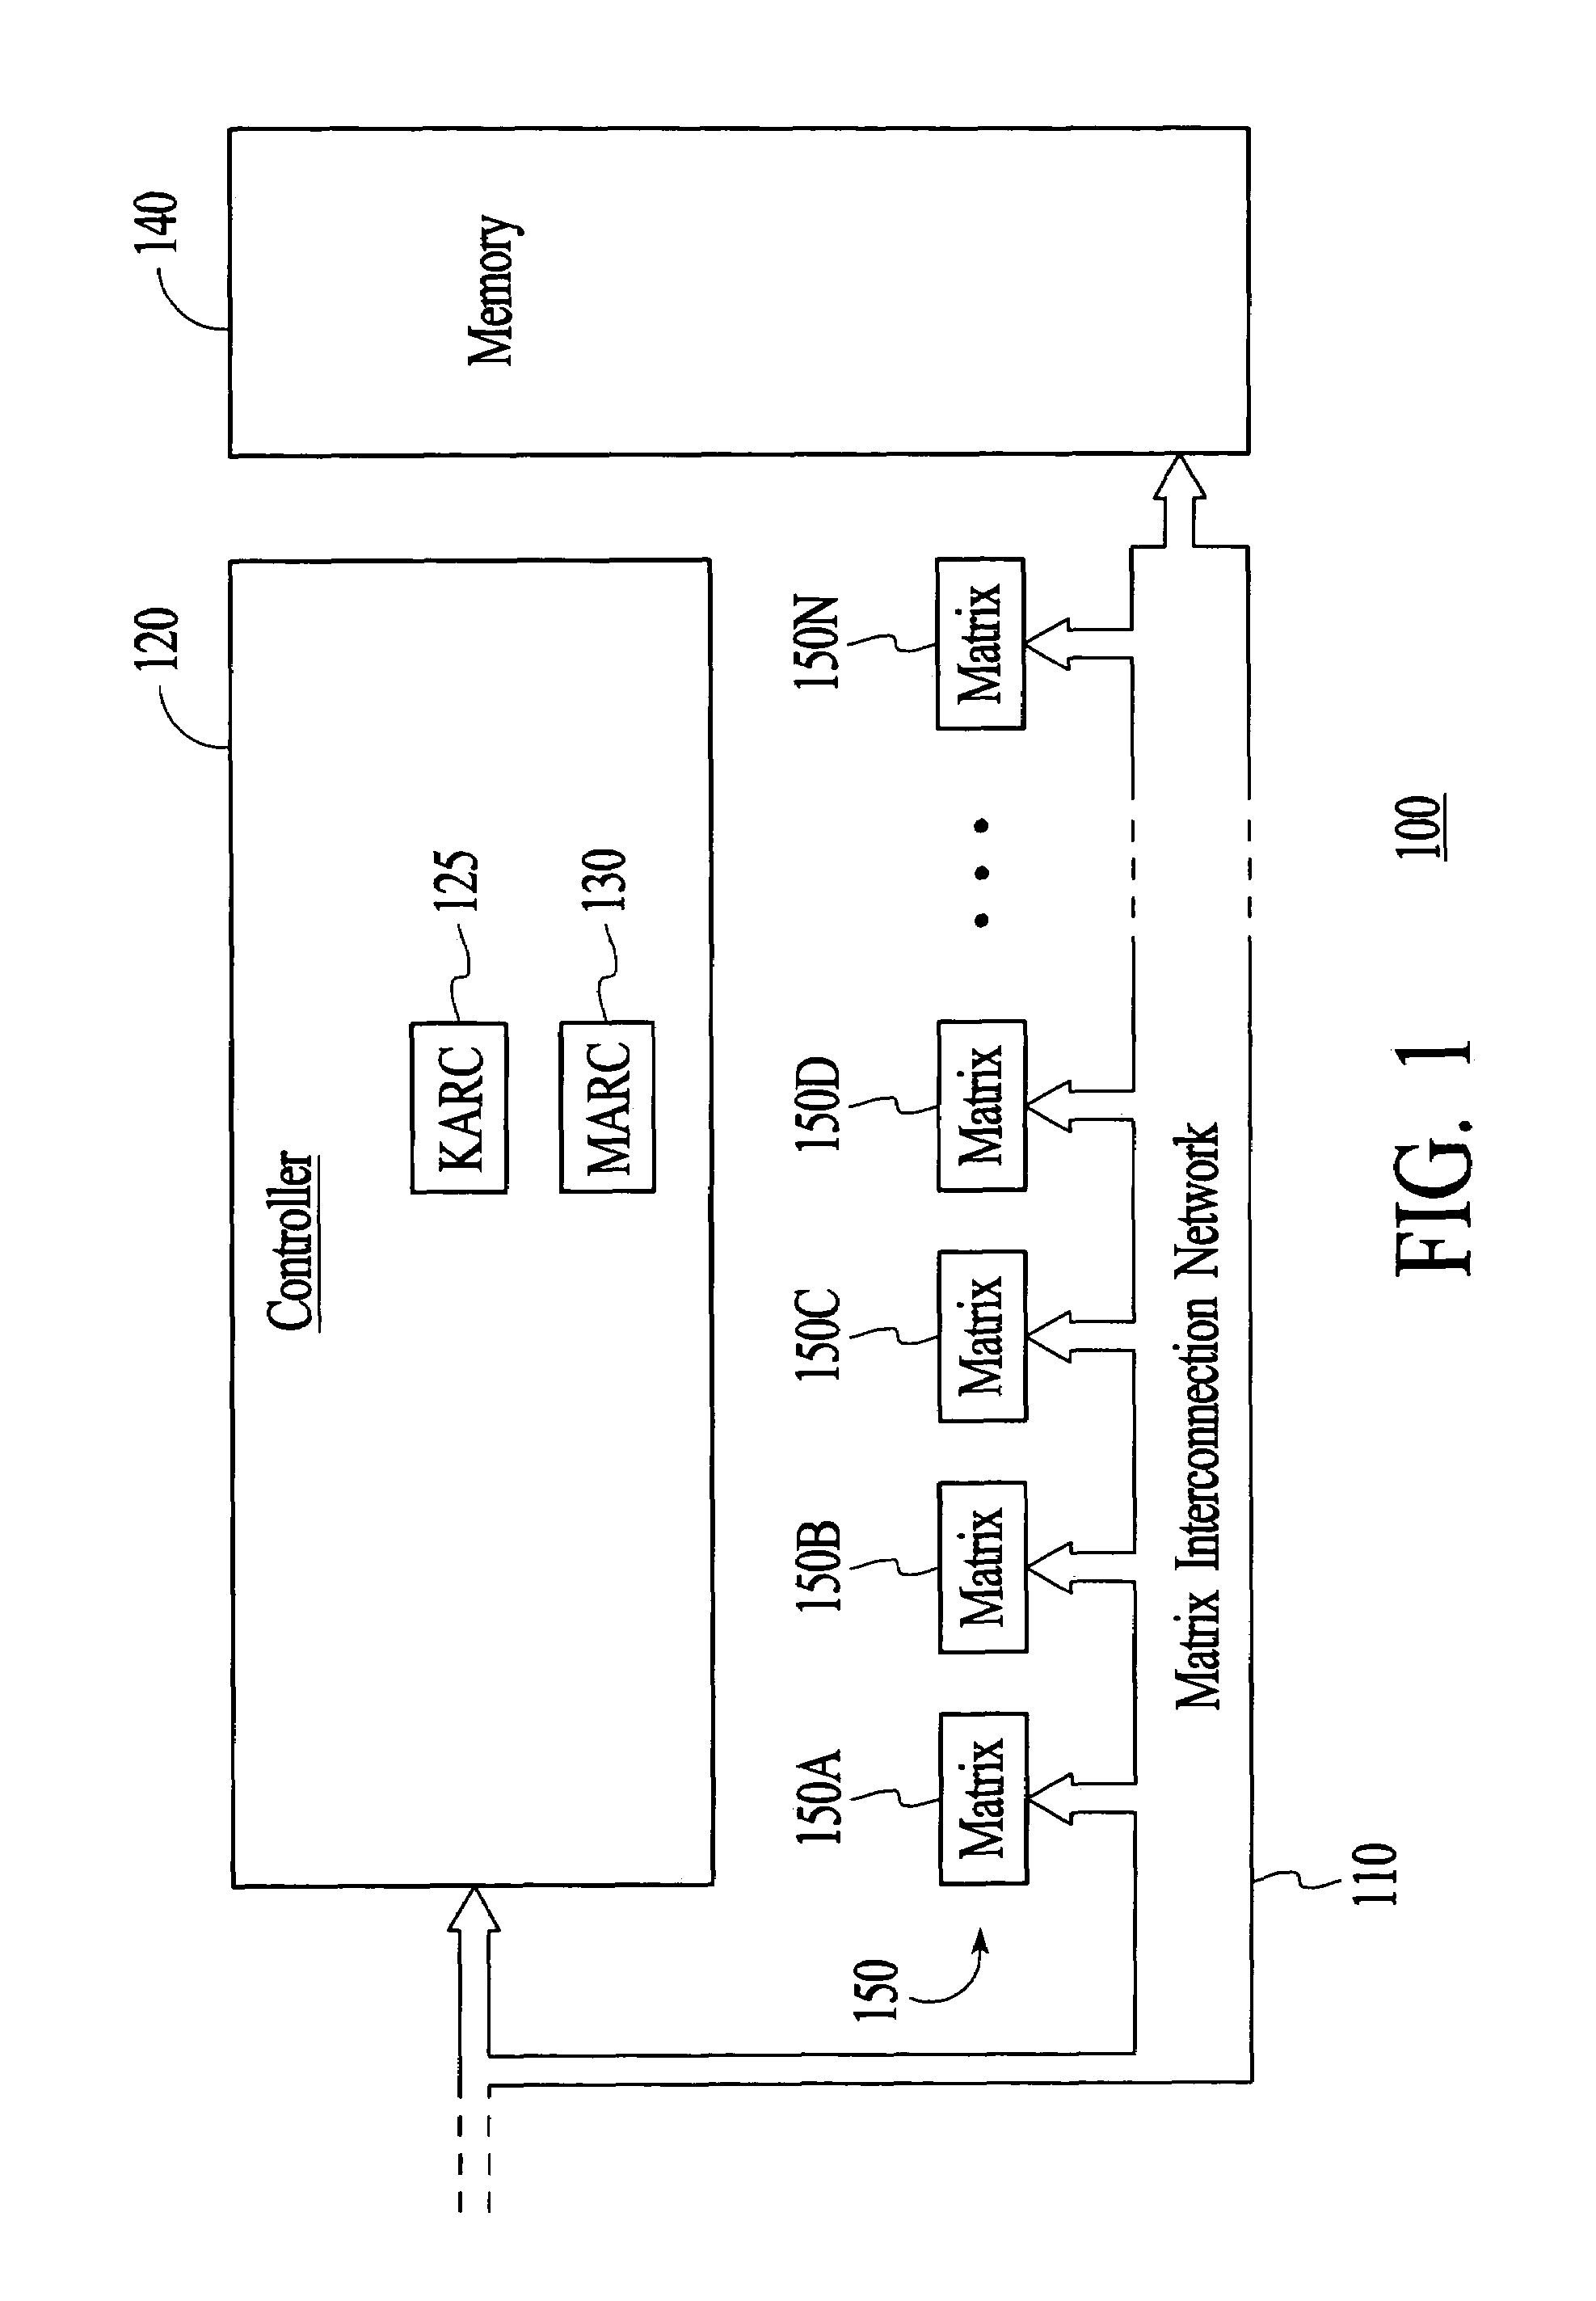 Method and system for reducing the time-to-market concerns for embedded system design